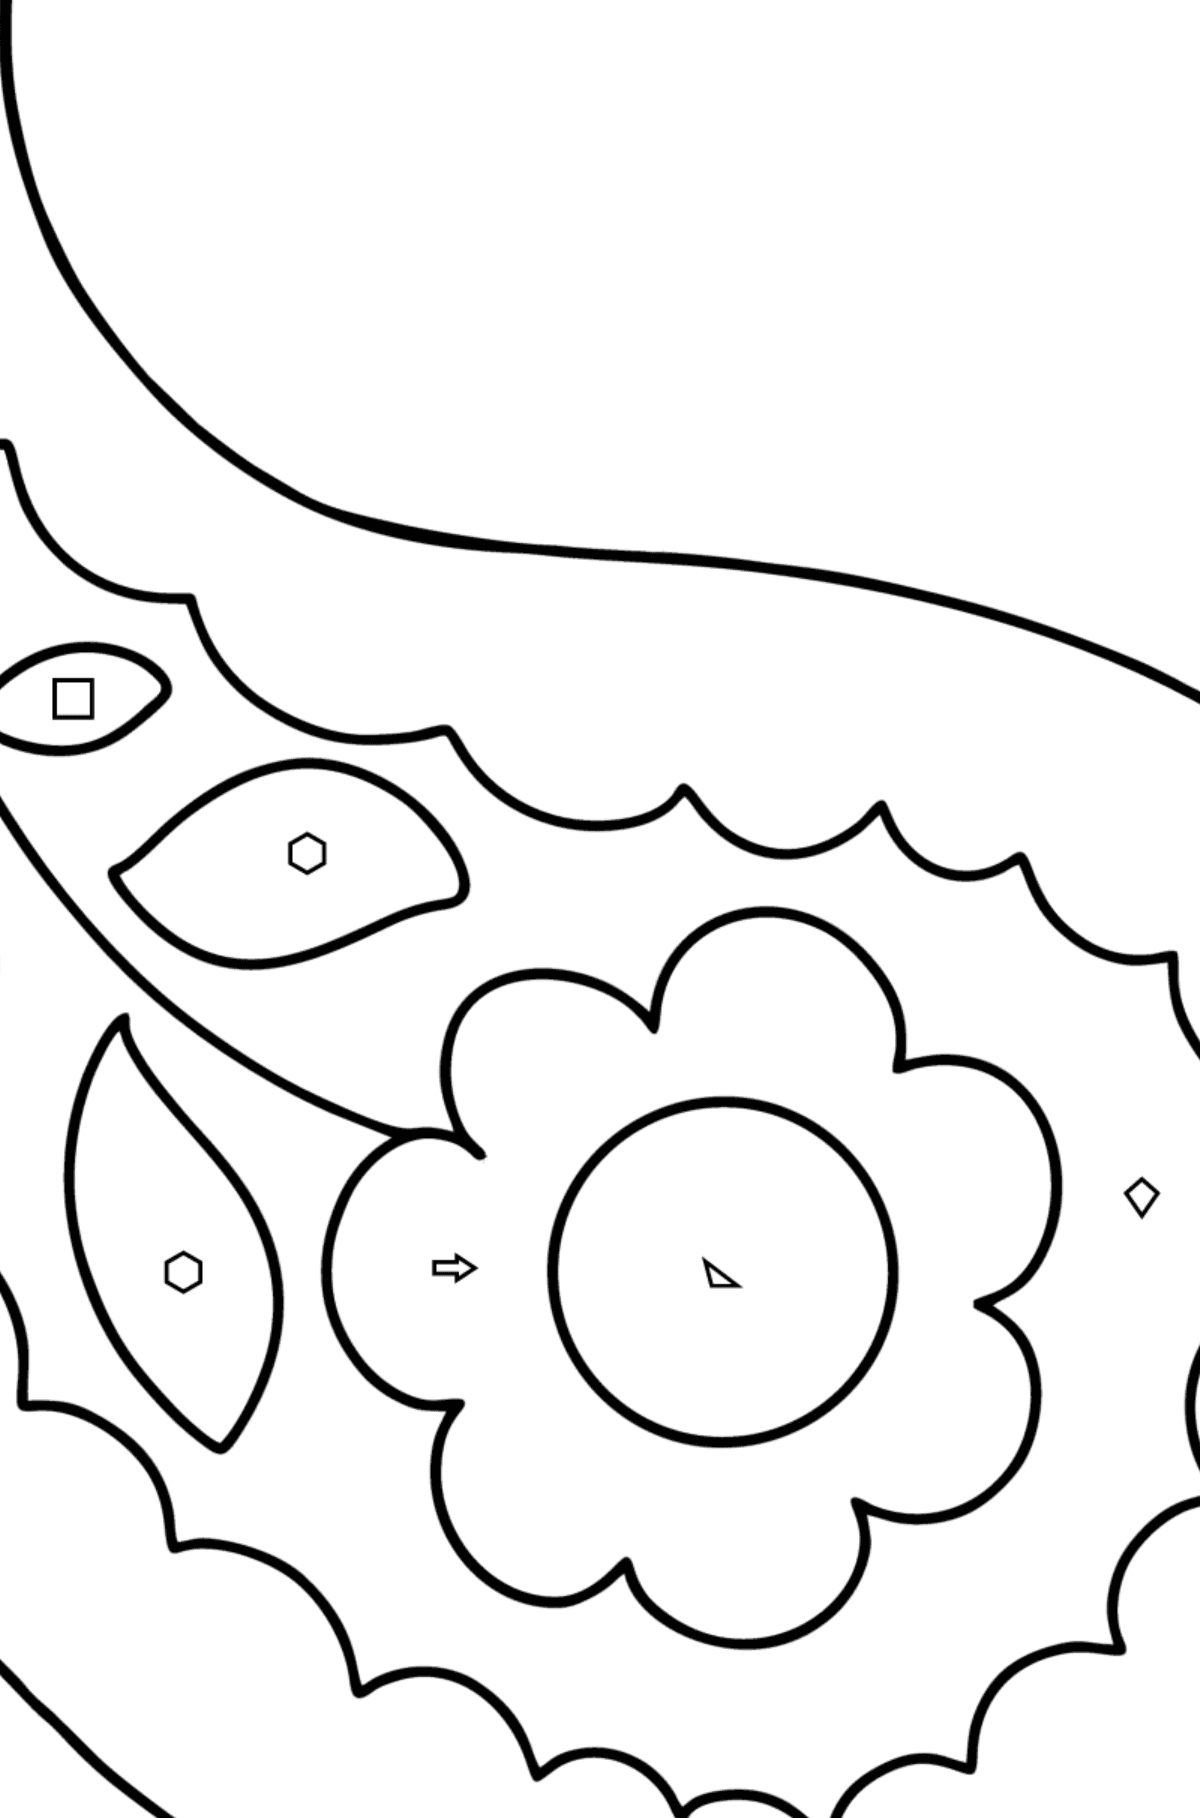 Paisley coloring page for baby - Coloring by Geometric Shapes for Kids